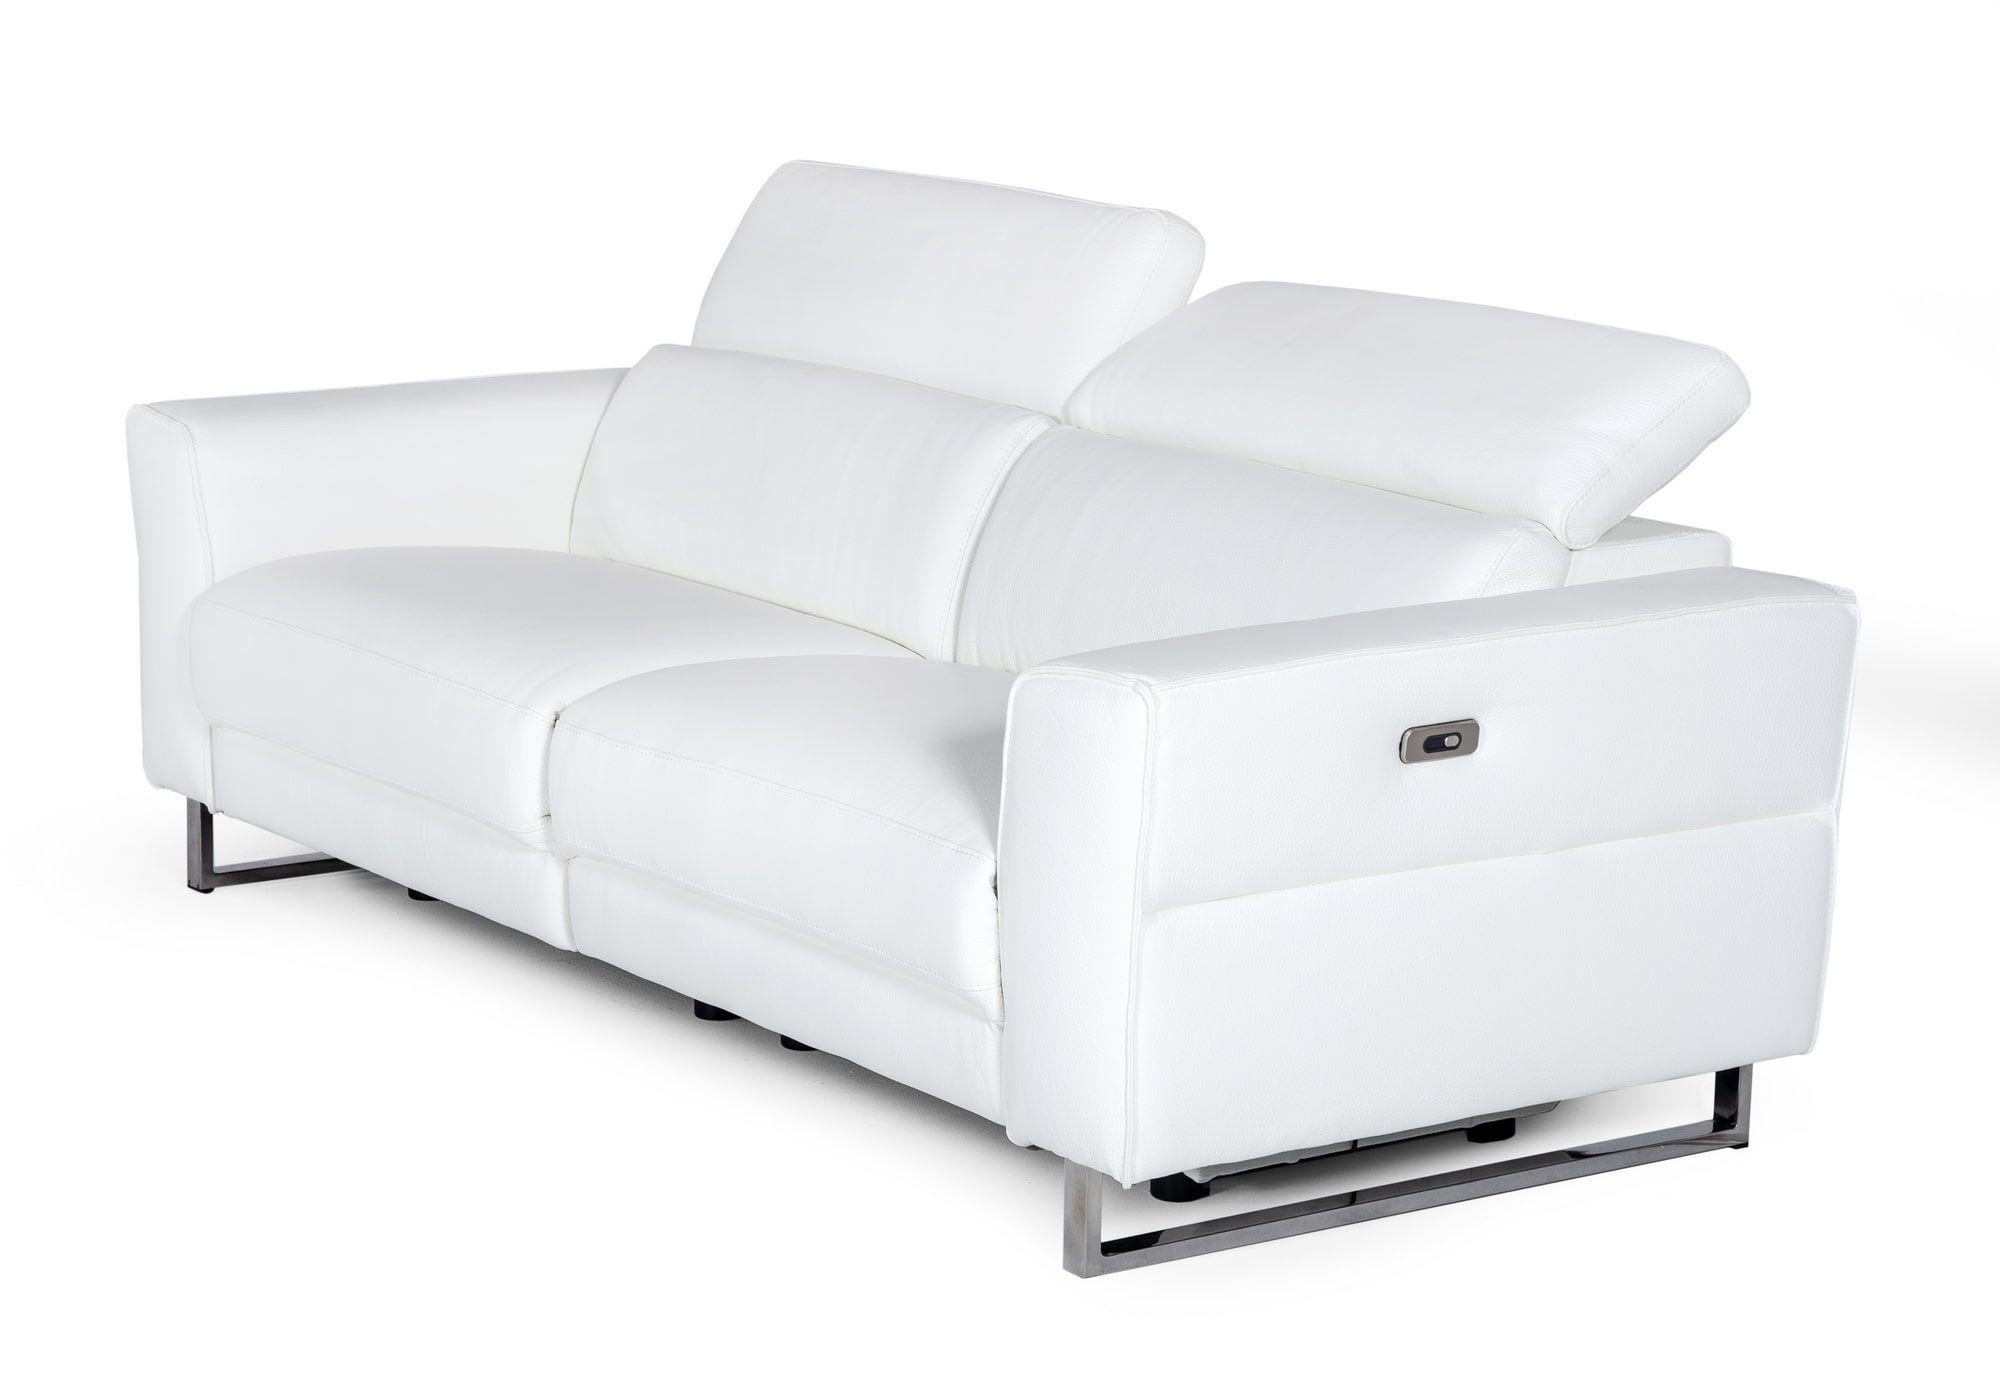 Contemporary, Modern Recliner Sofa VGDDLUCCA-WHT-S VGDDLUCCA-WHT-S in White Genuine Leather